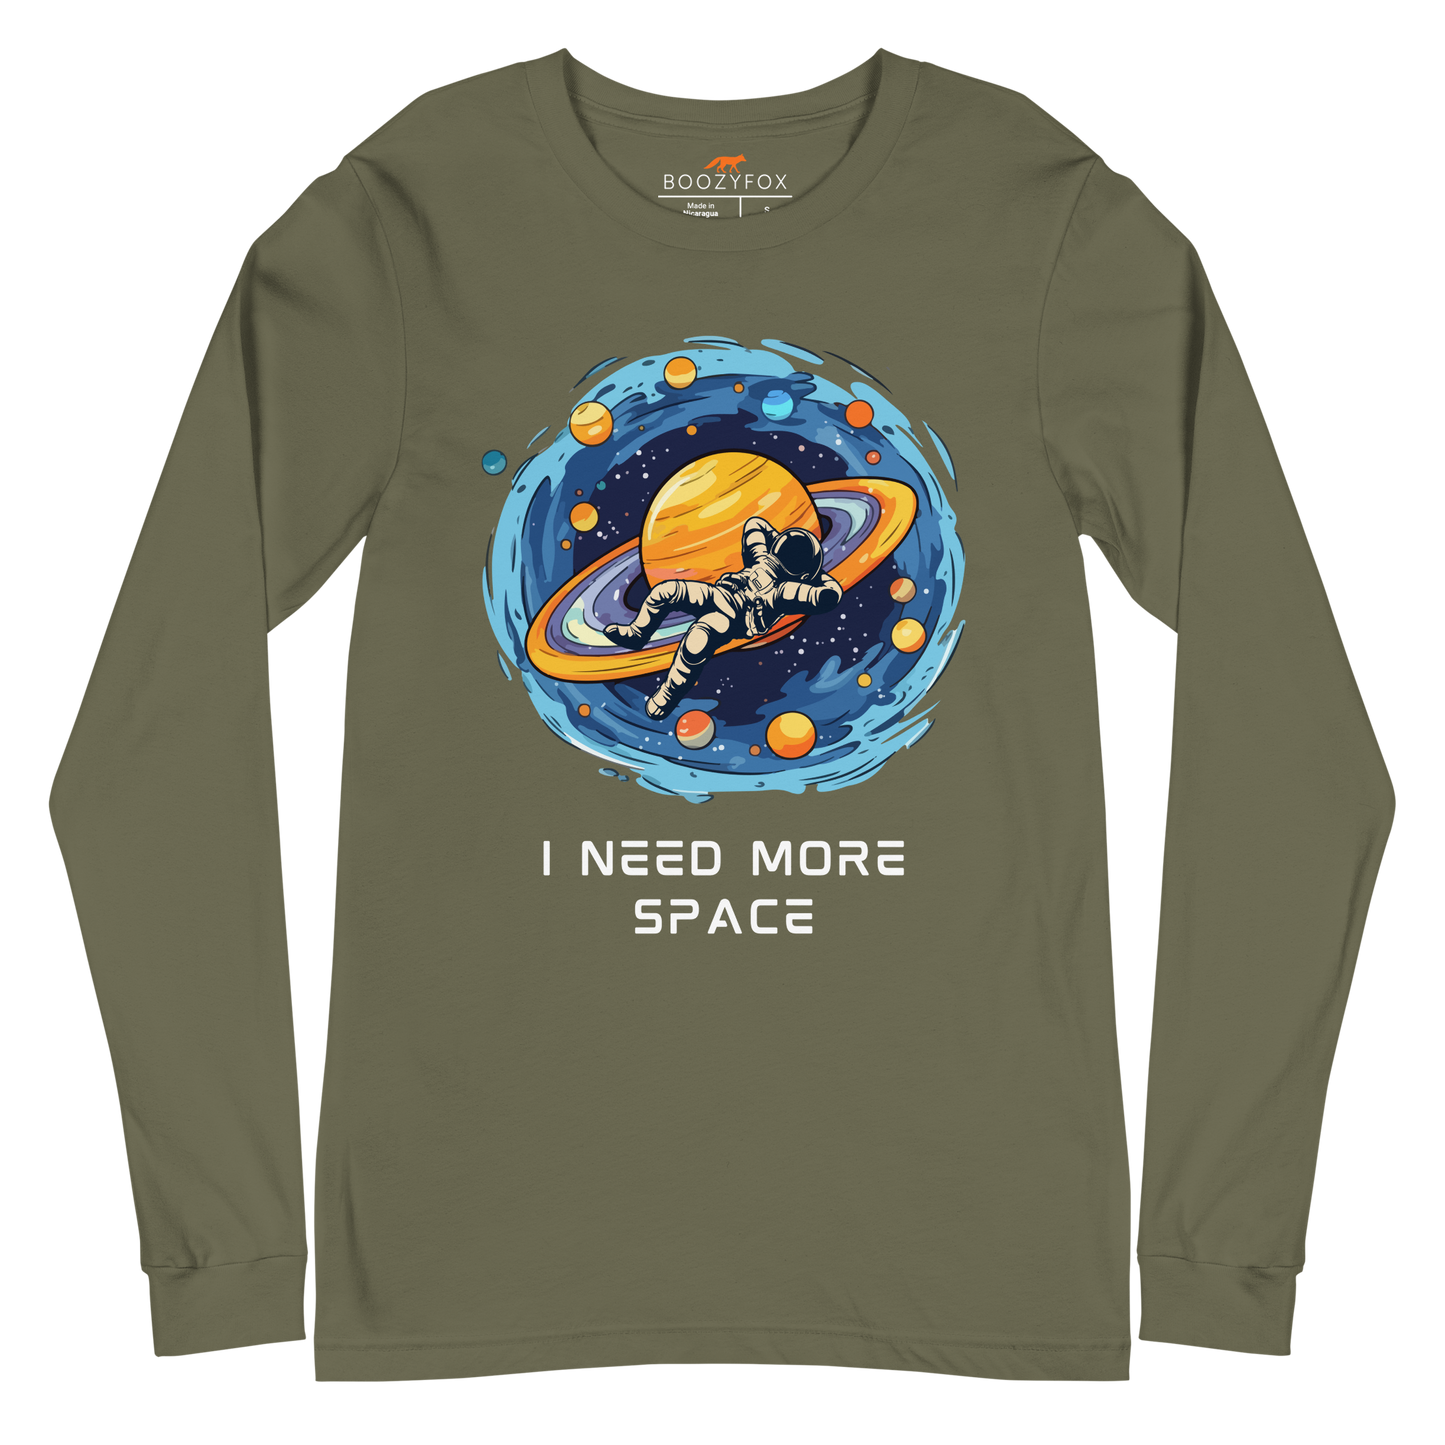 Military Green Astronaut Long Sleeve Tee featuring a captivating I Need More Space graphic on the chest - Funny Space Long Sleeve Graphic Tees - Boozy Fox